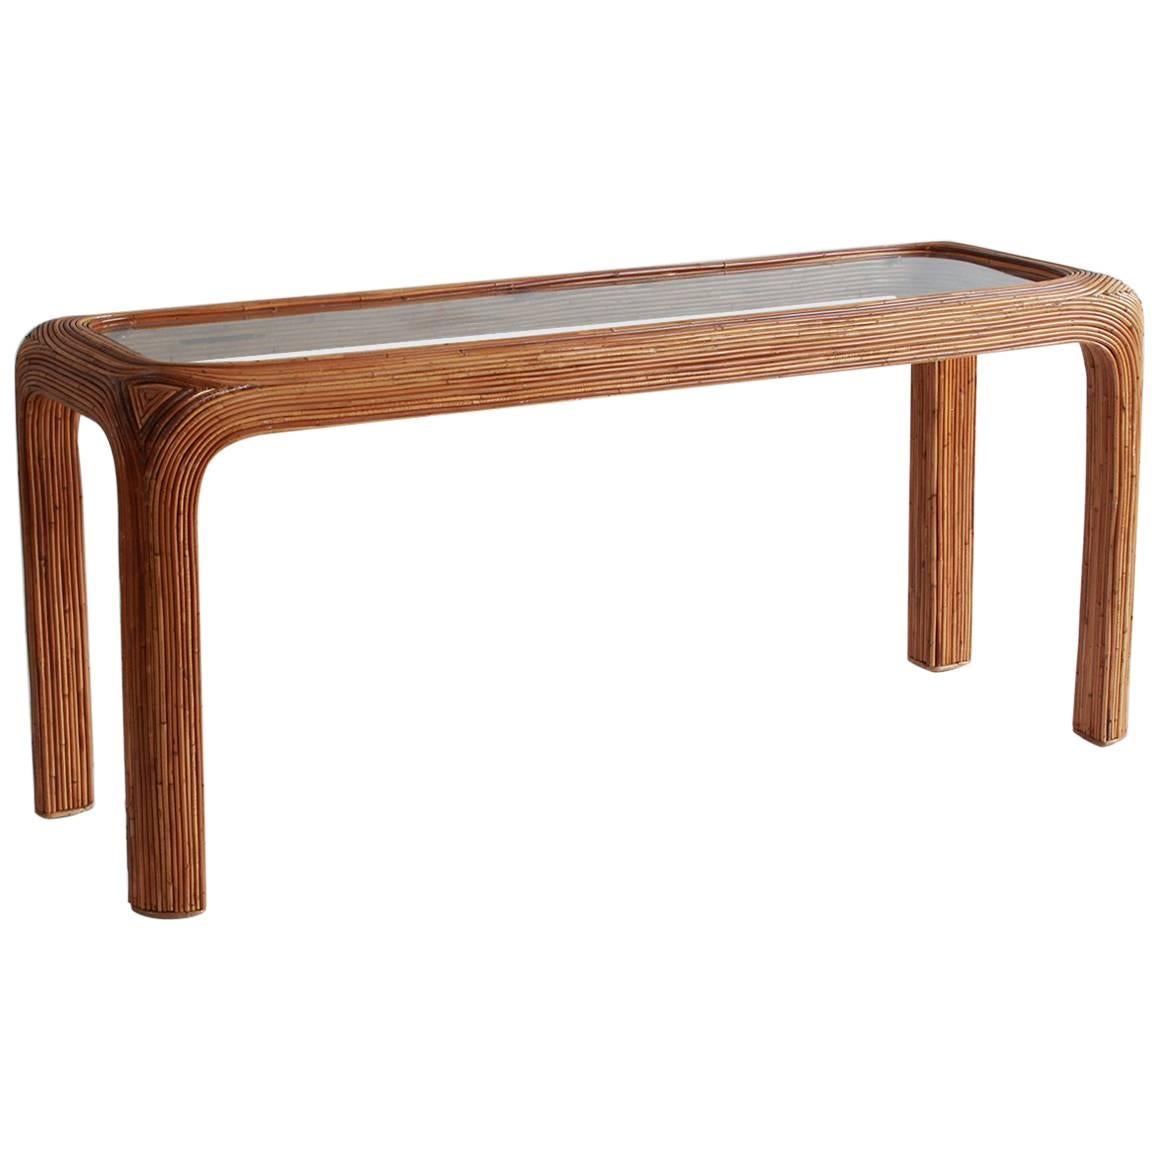 Gabriella Crespi Style Bamboo Console with Glass Top